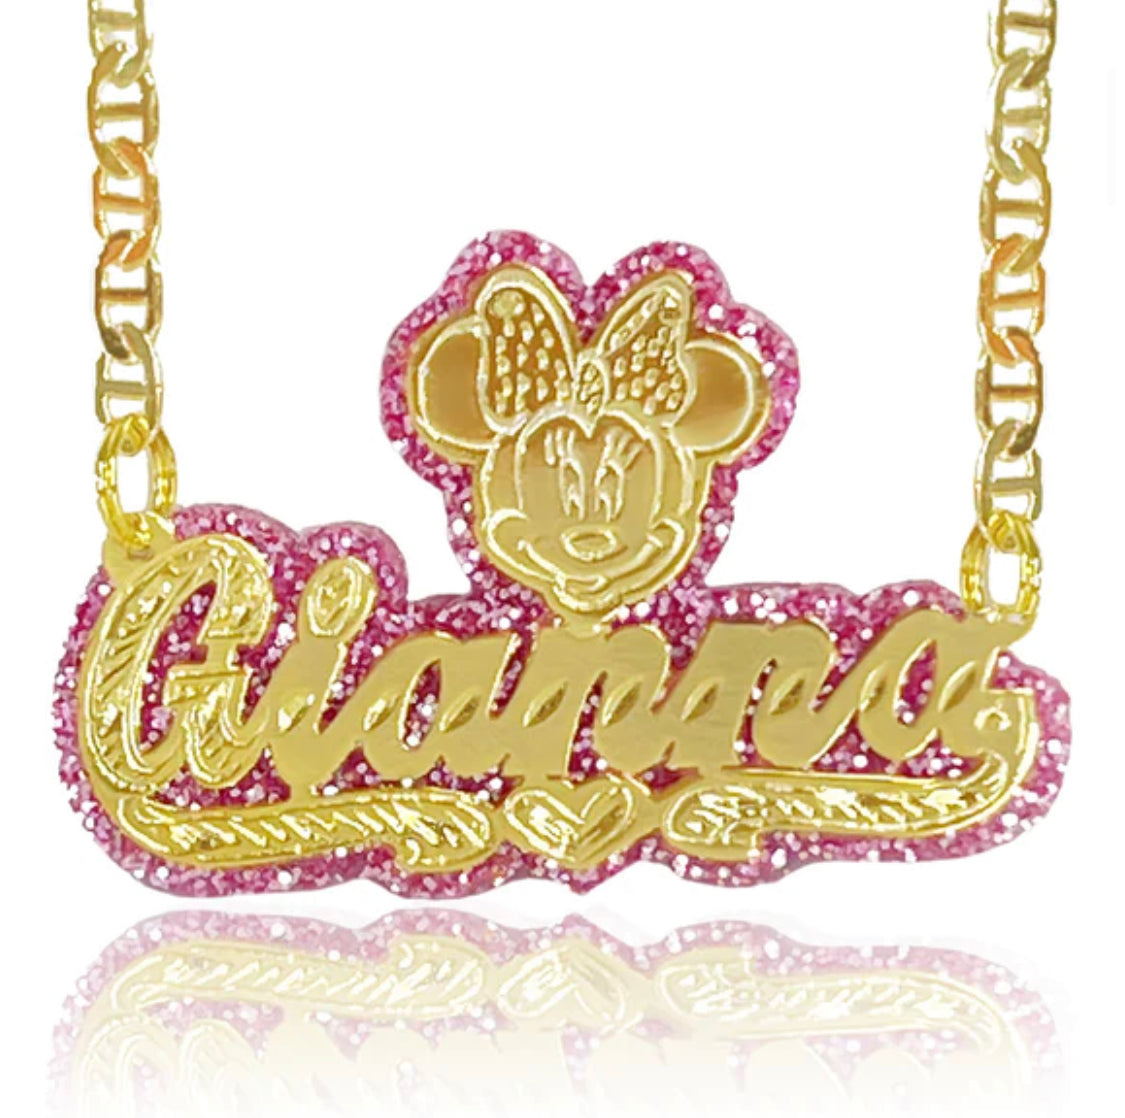 Kids Gold plated character necklace head